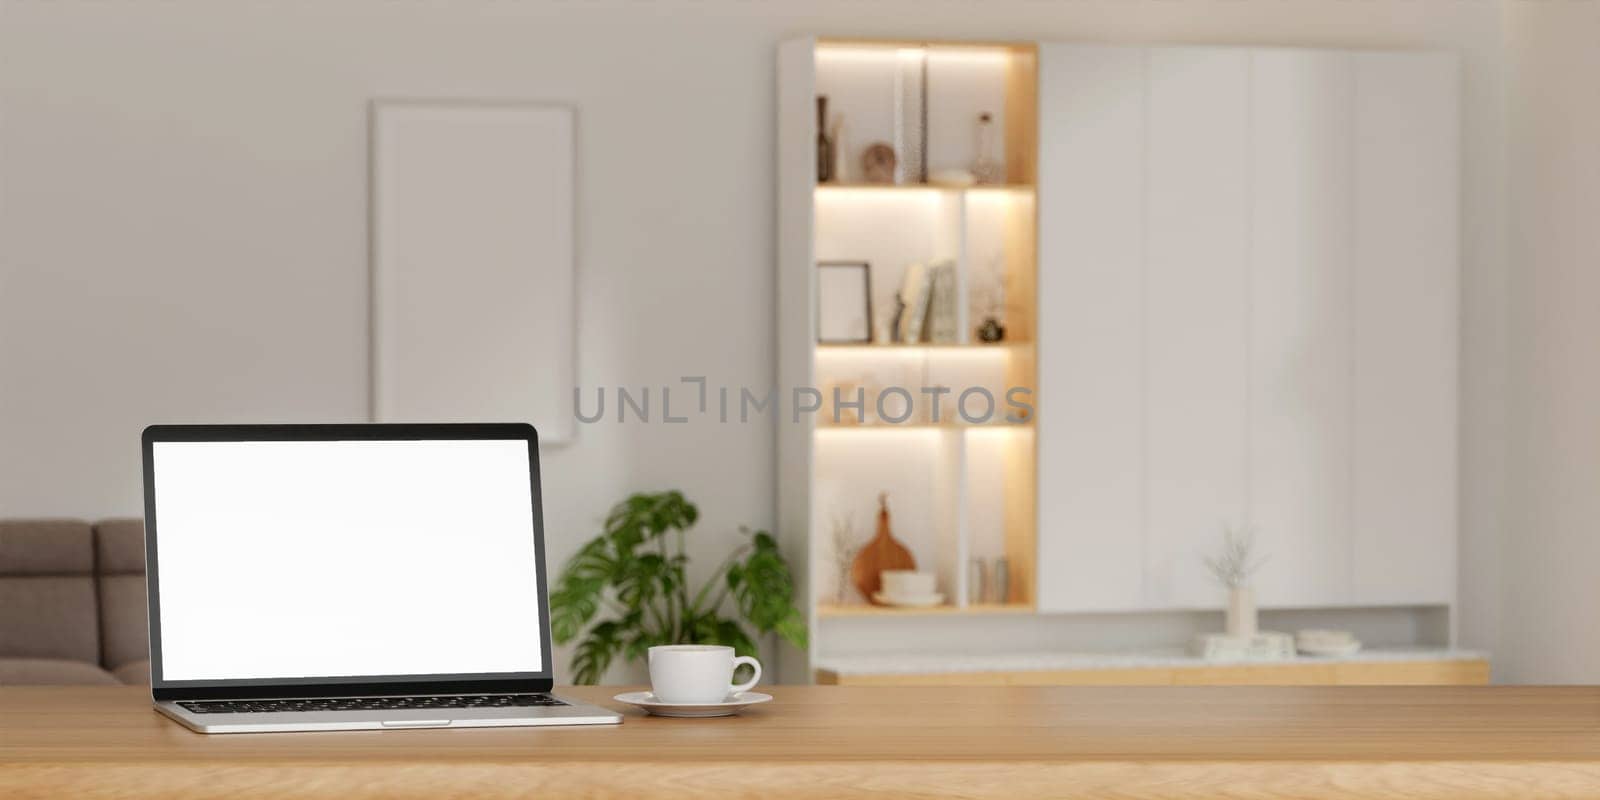 A laptop mockup on the table In minimal living room. on empty white wall background.3d render illustration by meepiangraphic